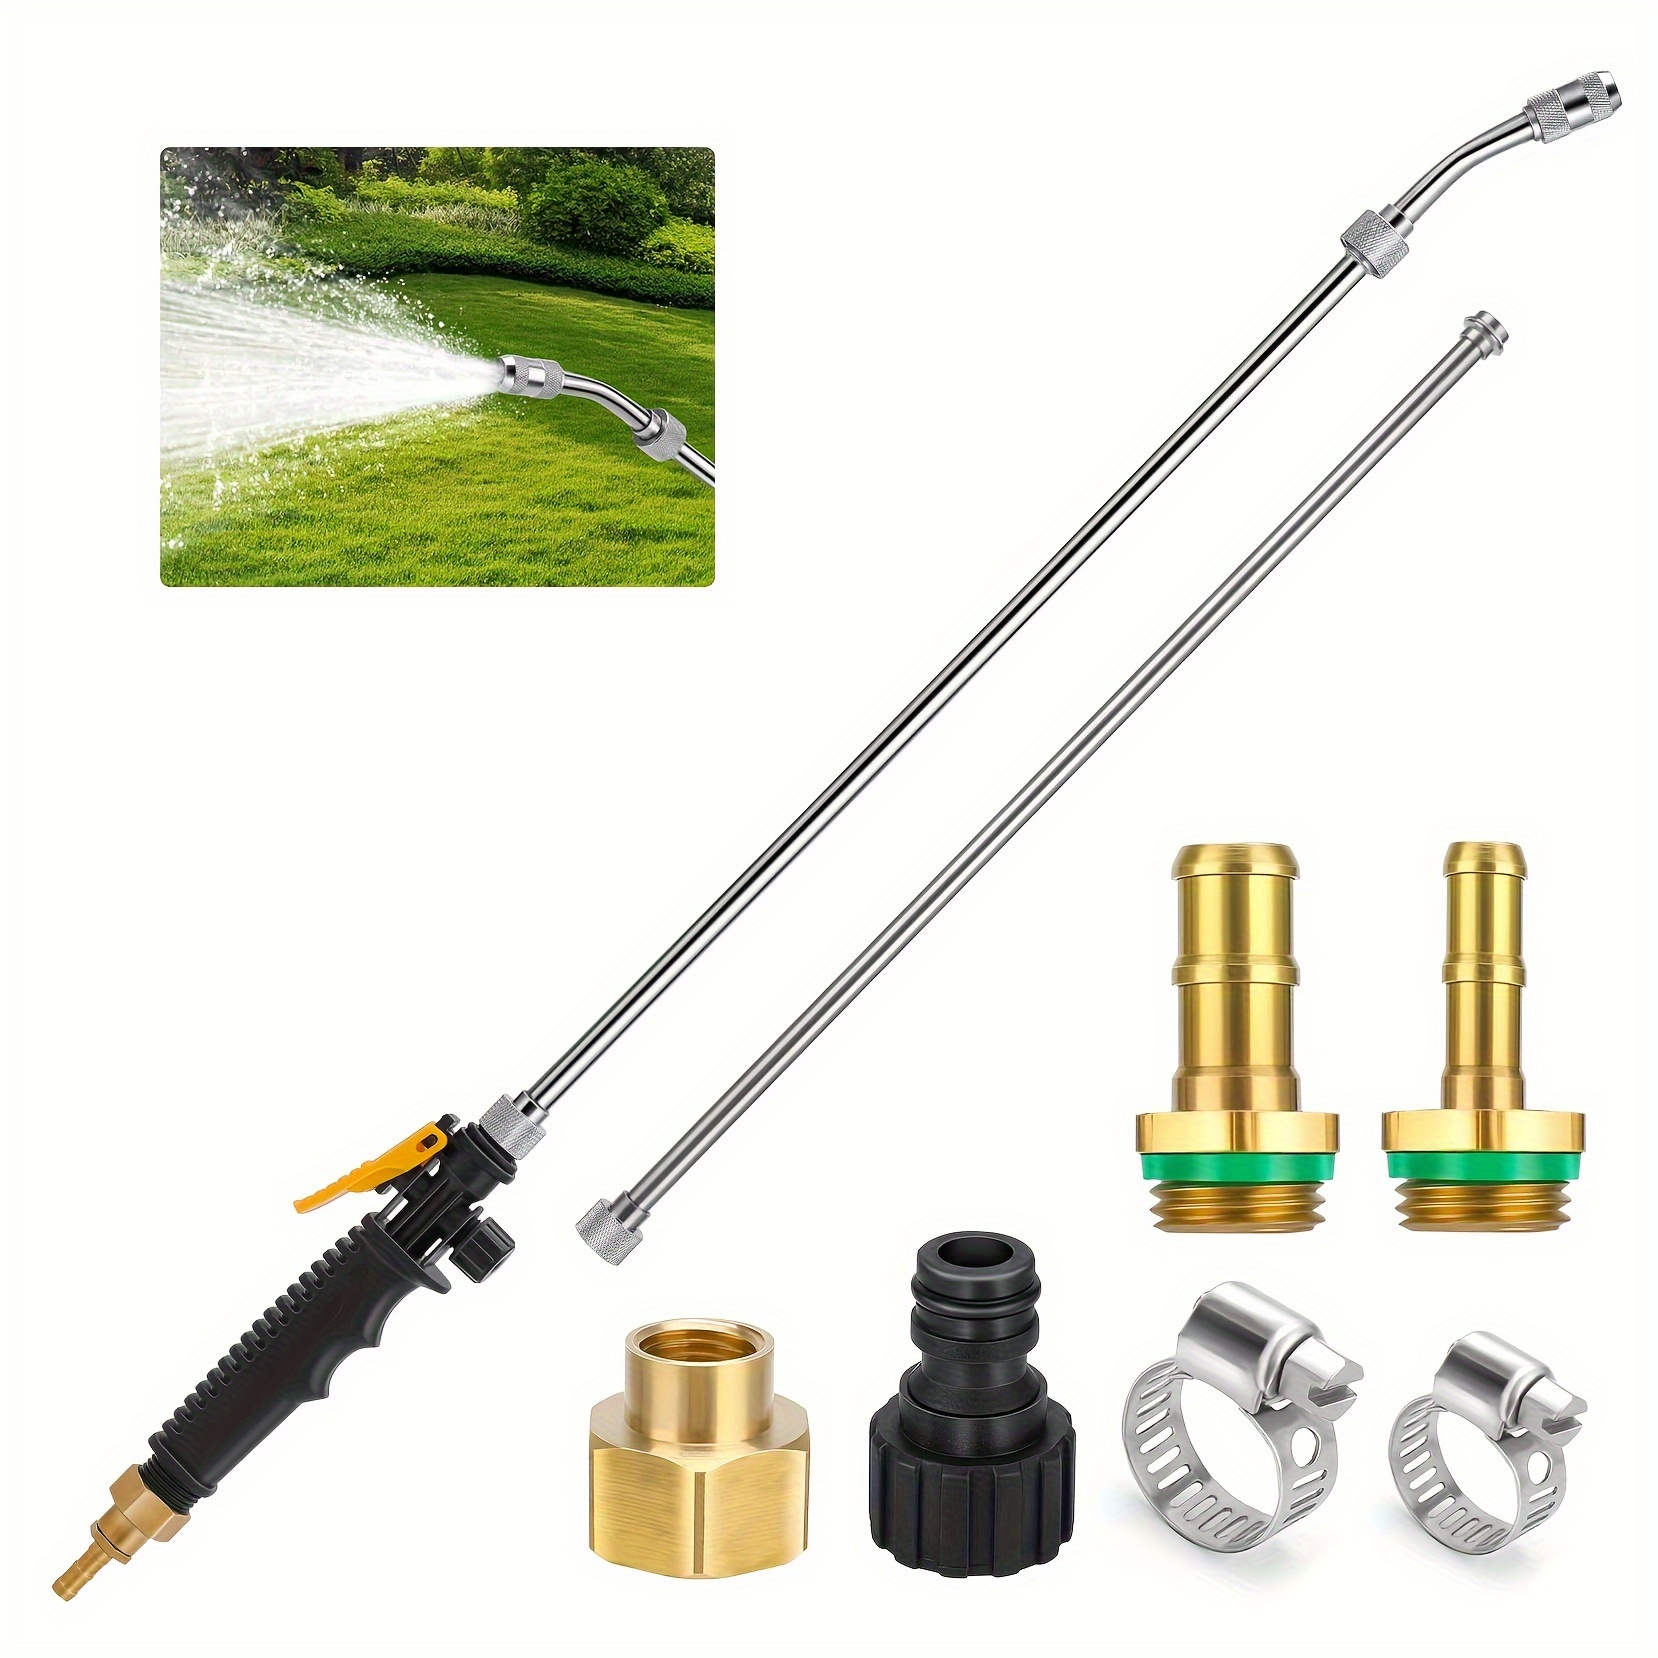 

43inch Sprayer Wand, 3/8" & 1/4" Brass Barb Universal Sprayer Wand Replacement, Stainless Steel Sprayer Parts With Shut Off Valve & 2 Hose Clamps, Spray Wands For Garden Hose, 1/2" Connector